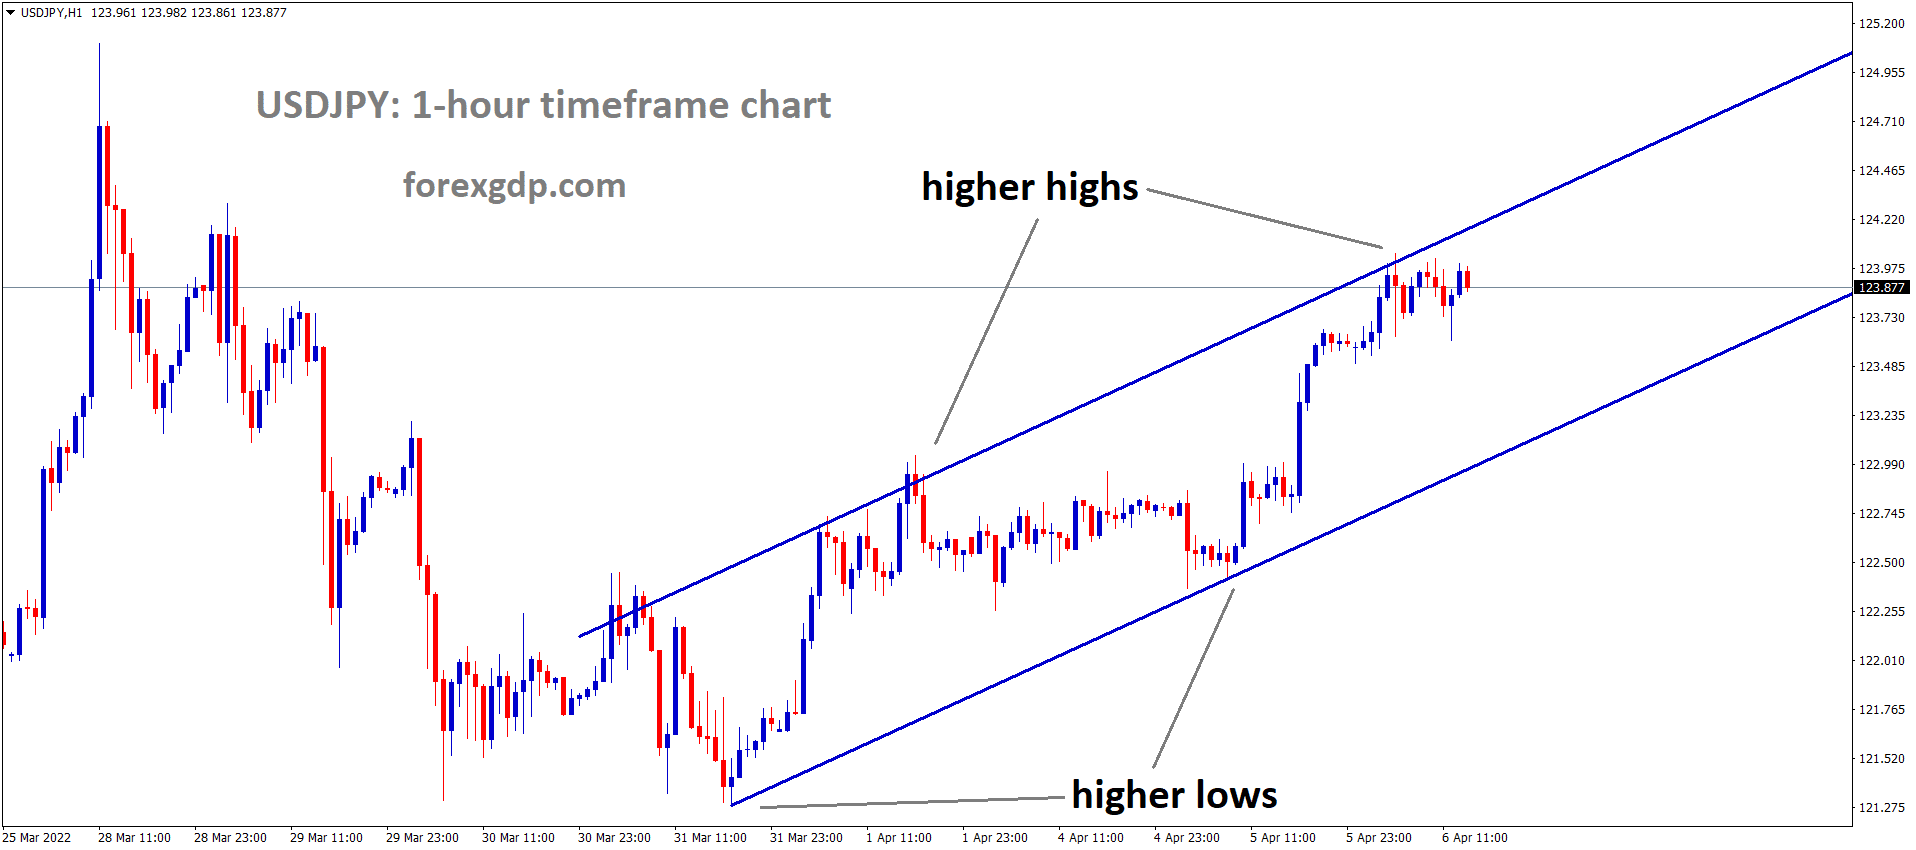 USDJPY H1 Time Frame Market is moving in an Ascending channel and the Market has Consolidated at the higher high area of the channel.